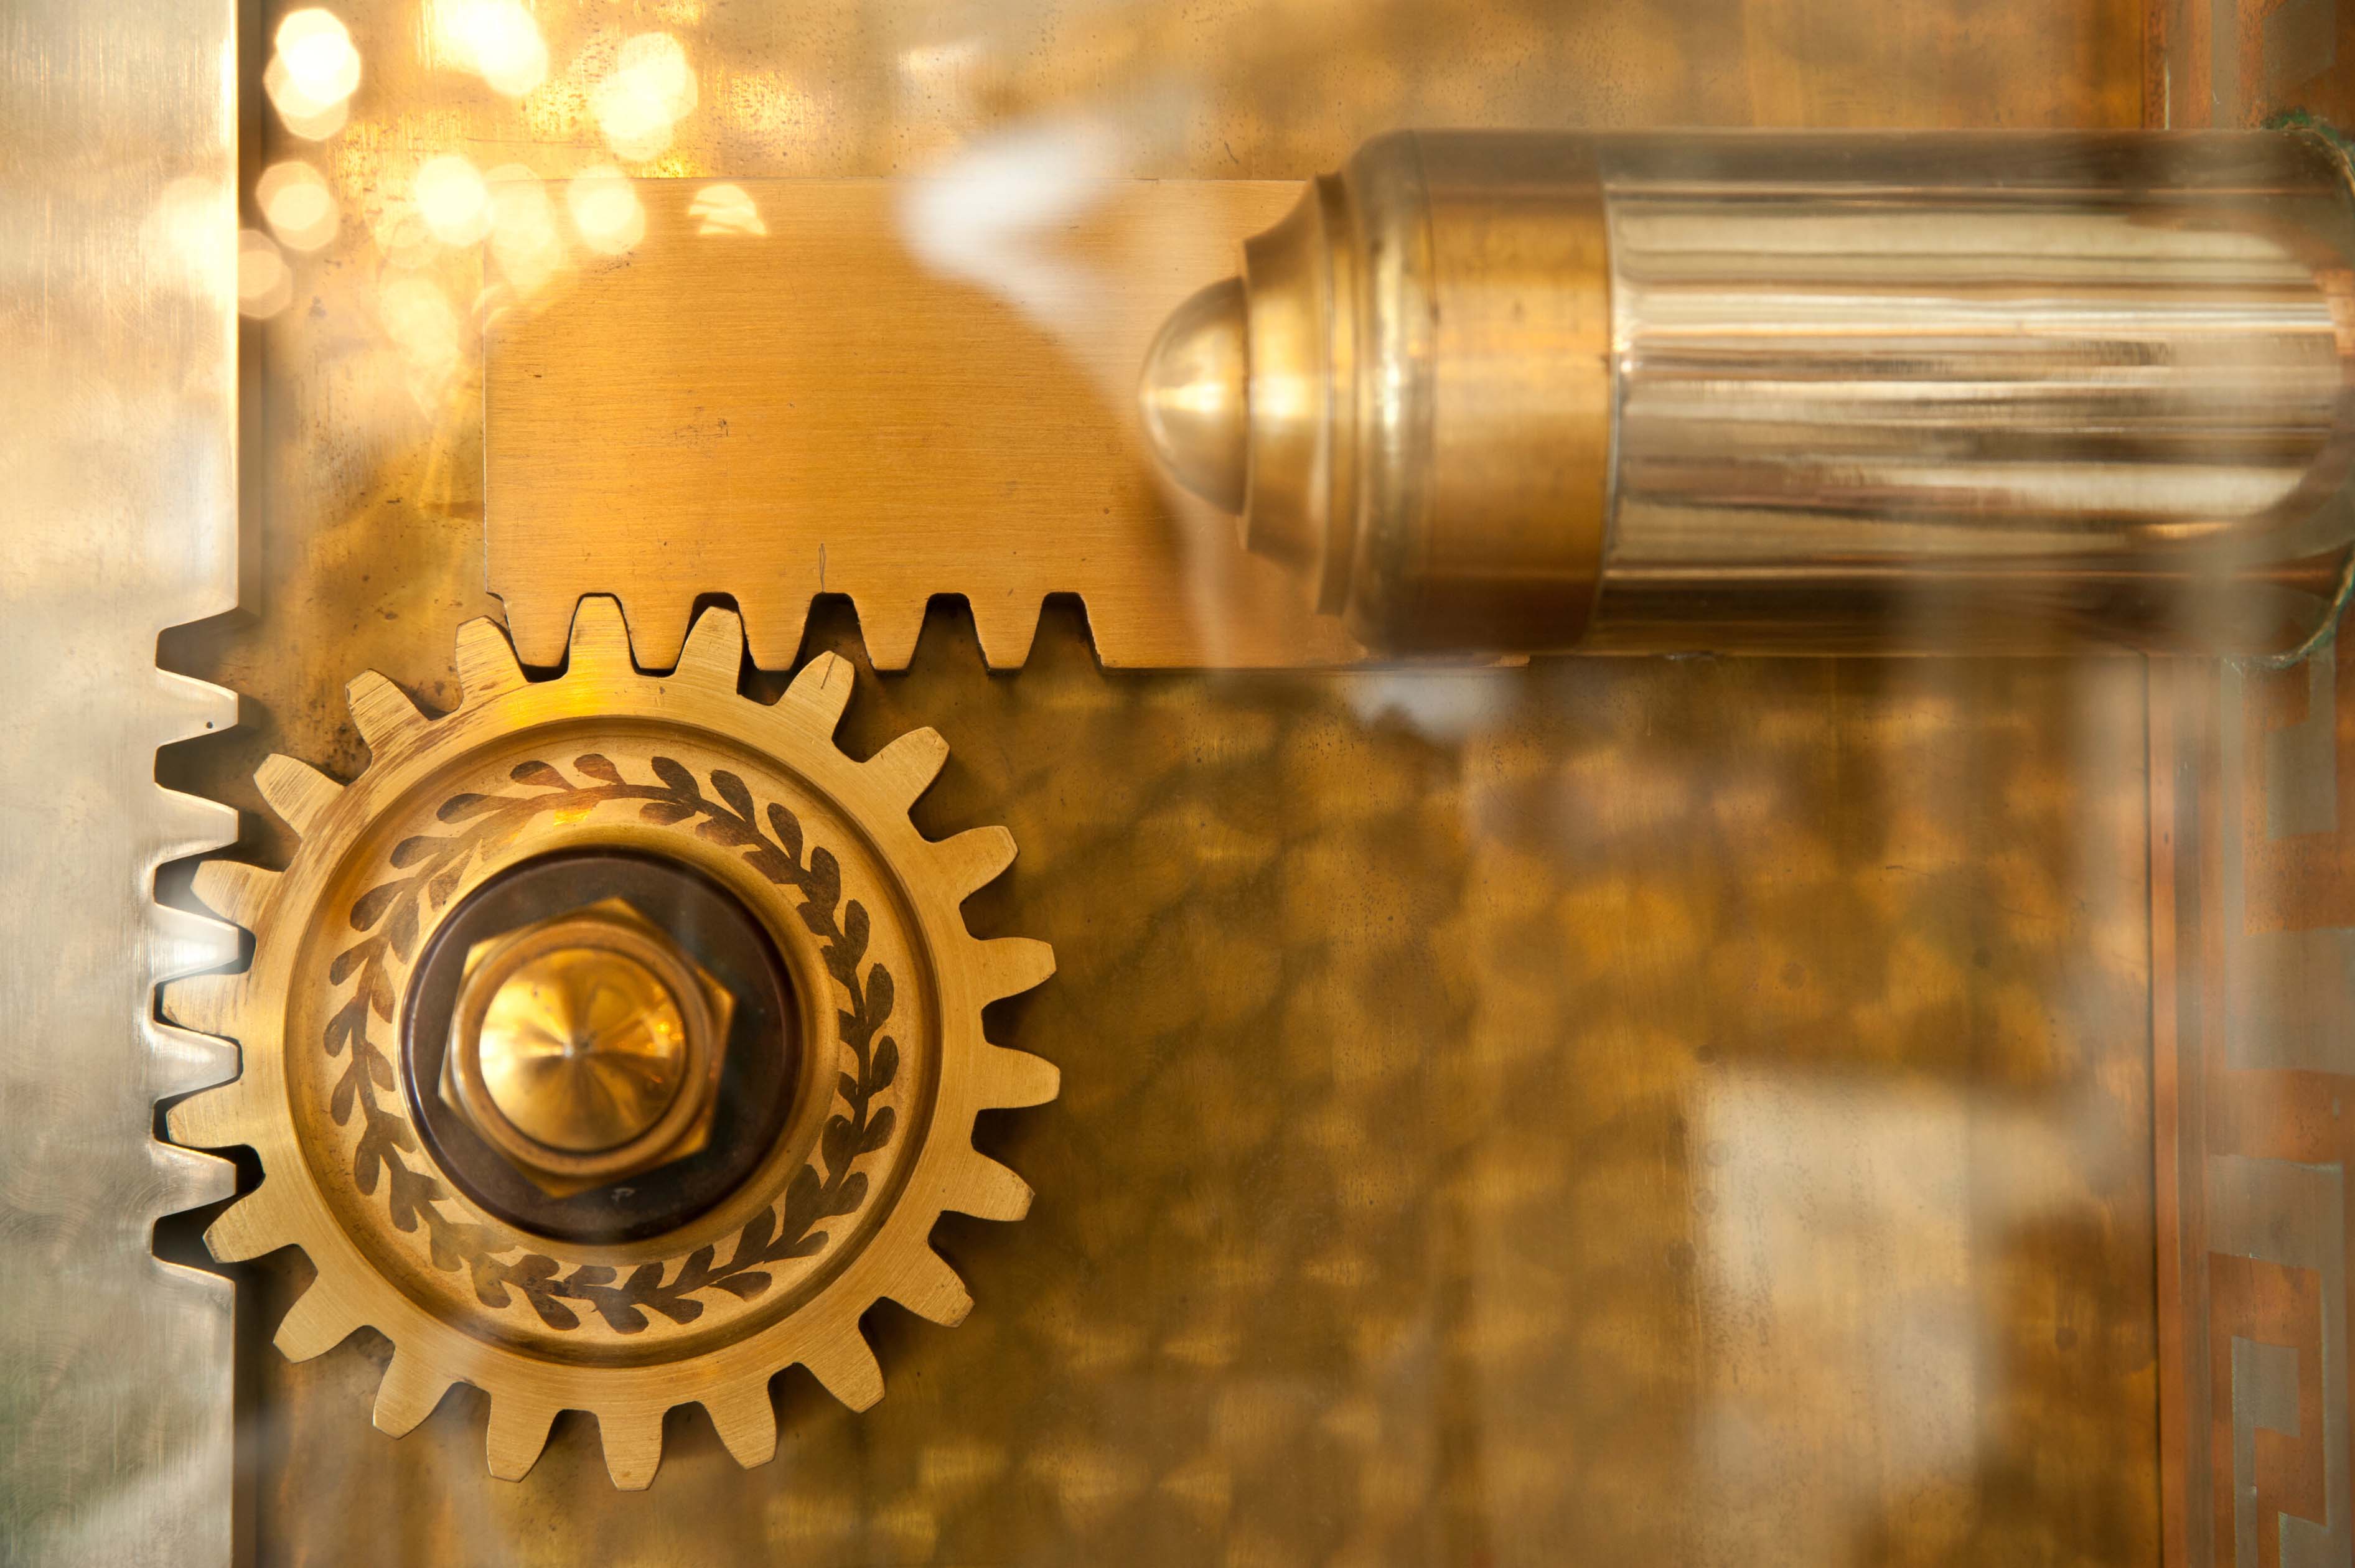 A golden decorative set of gears that are part of a locking mechanism